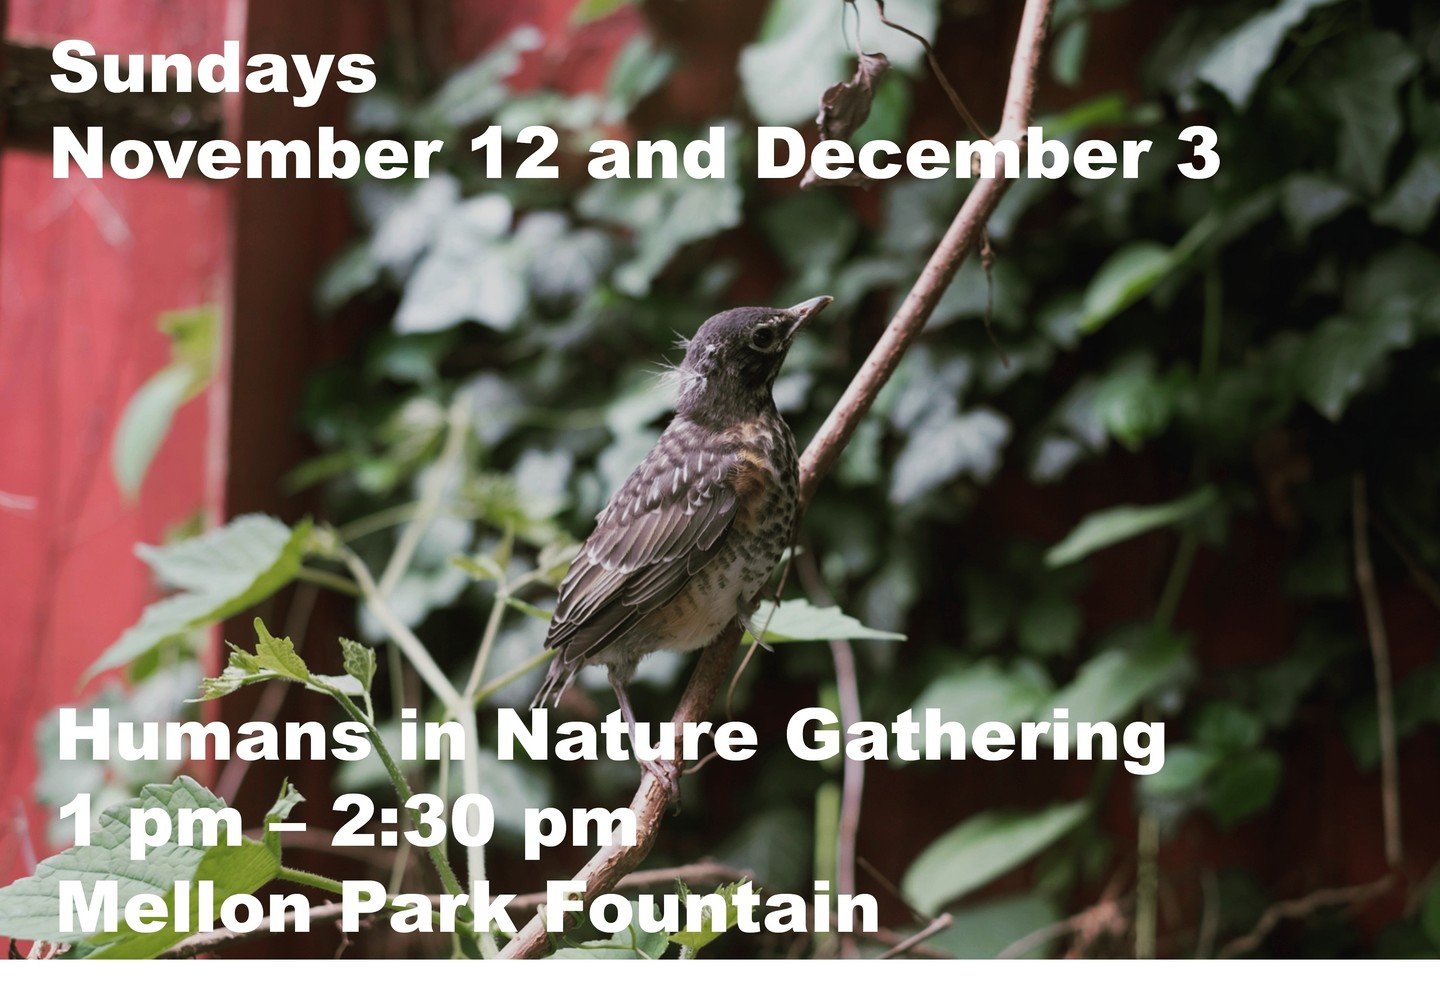 Continuing the series for the next two months! Please join us rain or shine in Mellon Park, Shadyside! We meet at the fountain and then explore the plants, trees, animals and birds of the park, they have a lot to share with us!